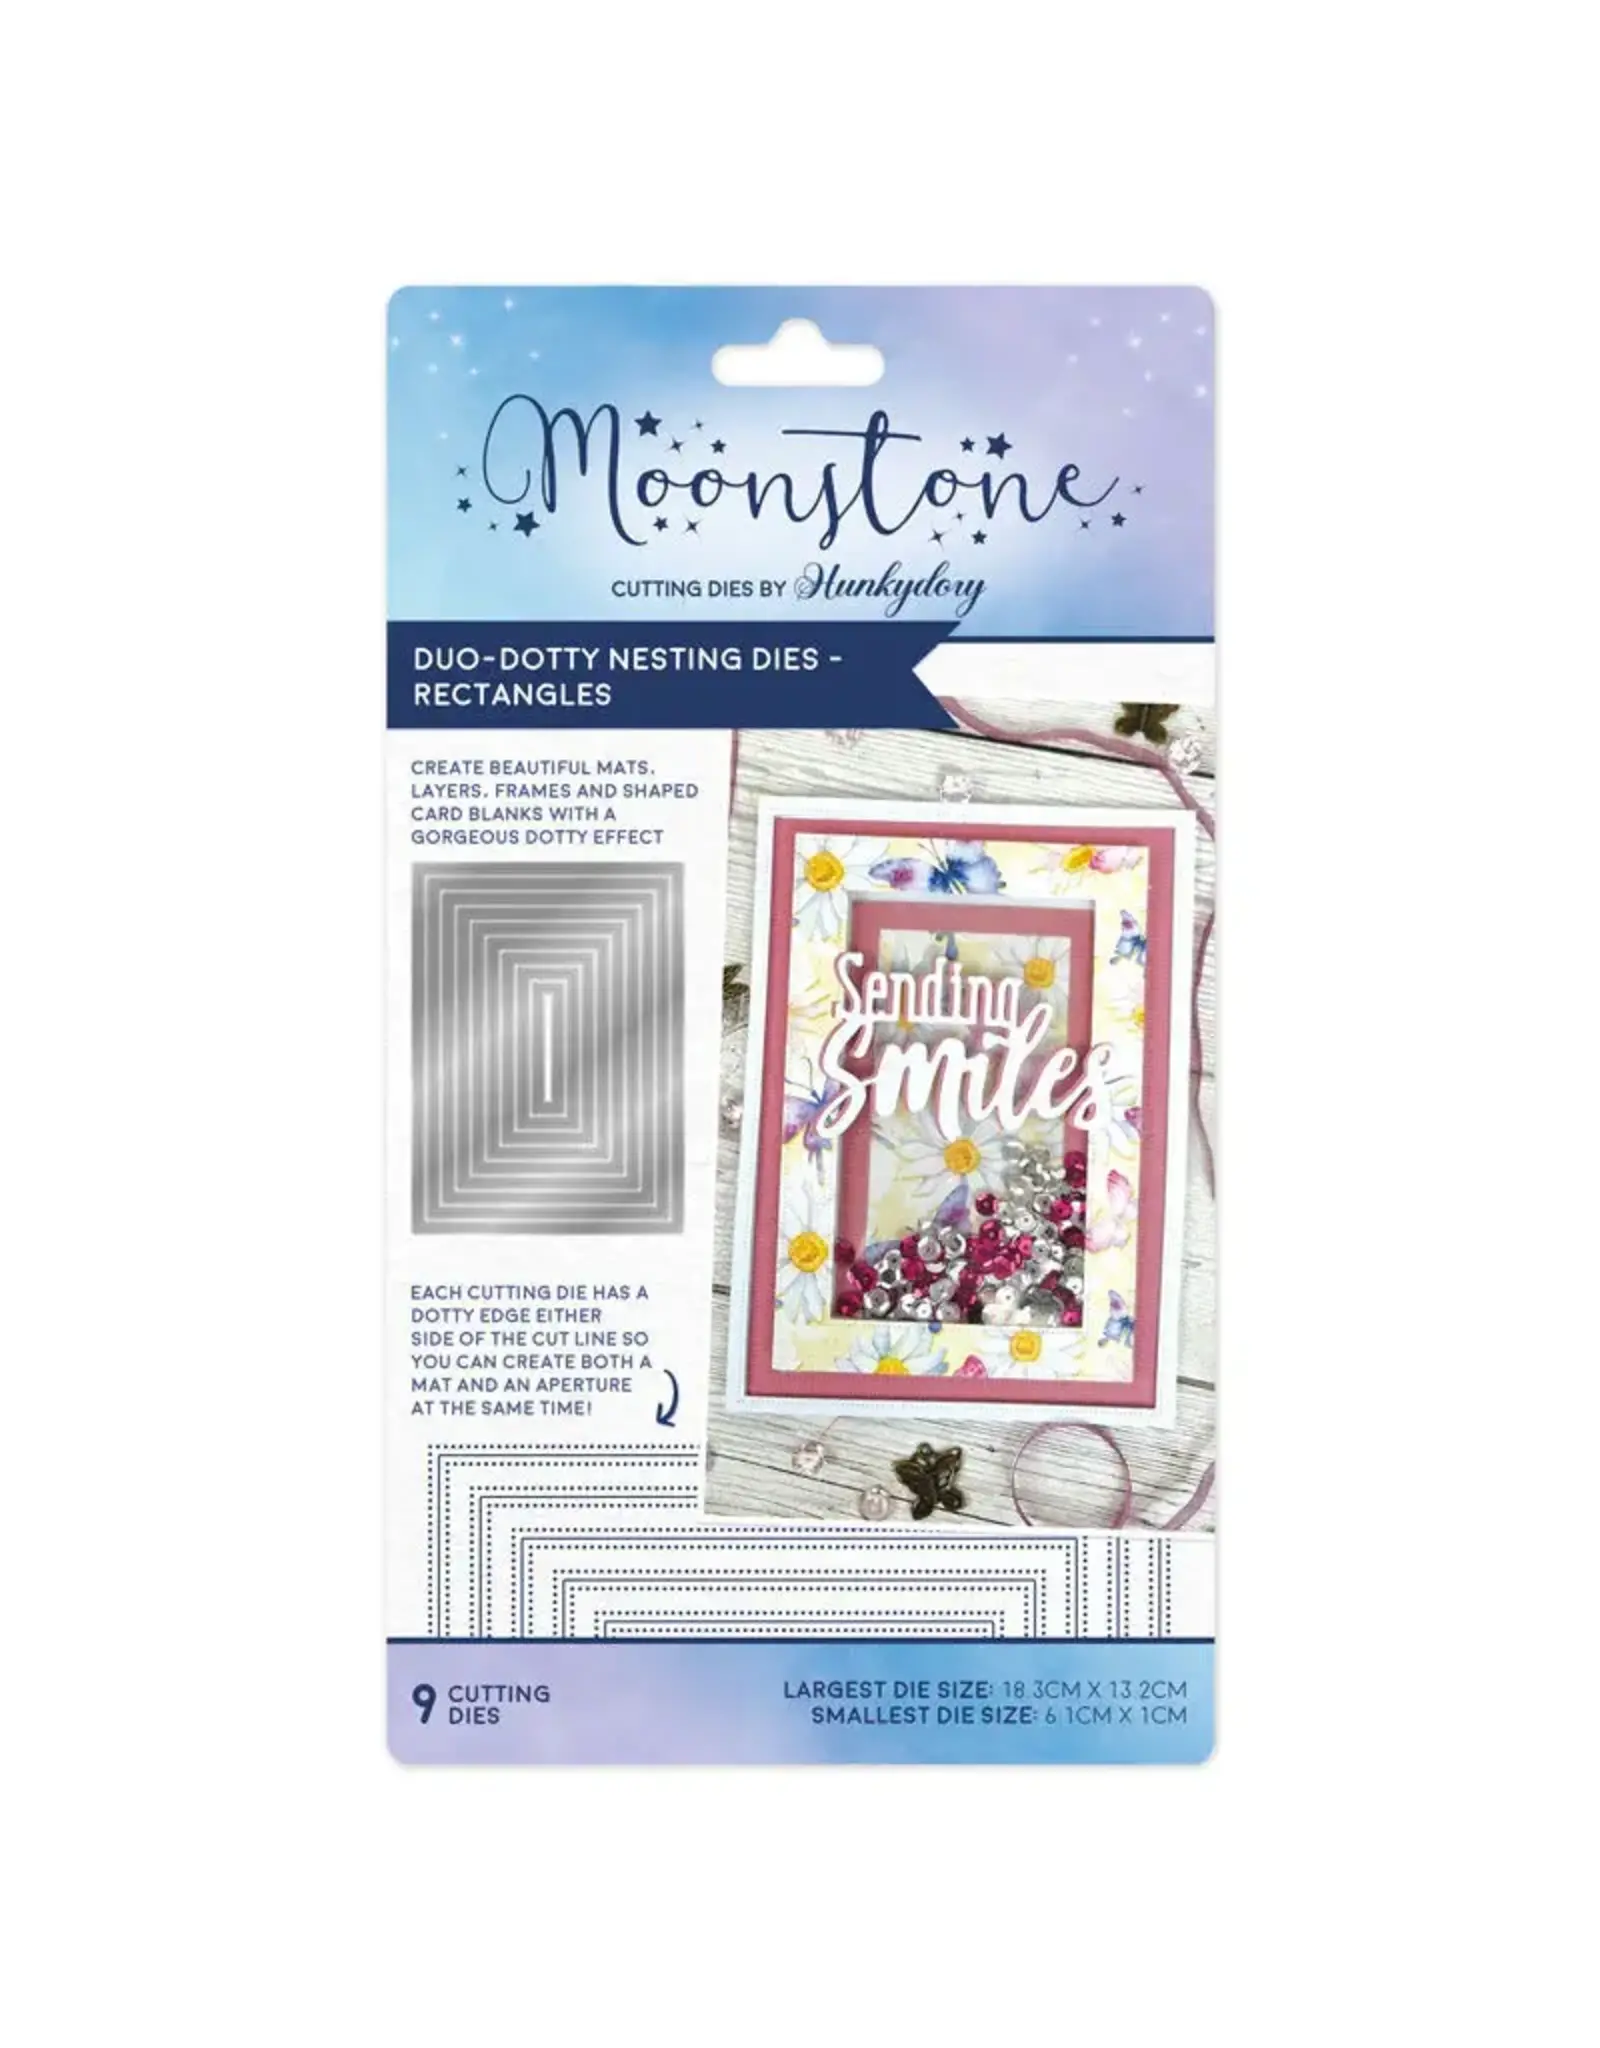 HUNKYDORY CRAFTS LTD. HUNKYDORY MOONSTONE DUO-DOTTY NESTING DIES - RECTANGLES DIE SET